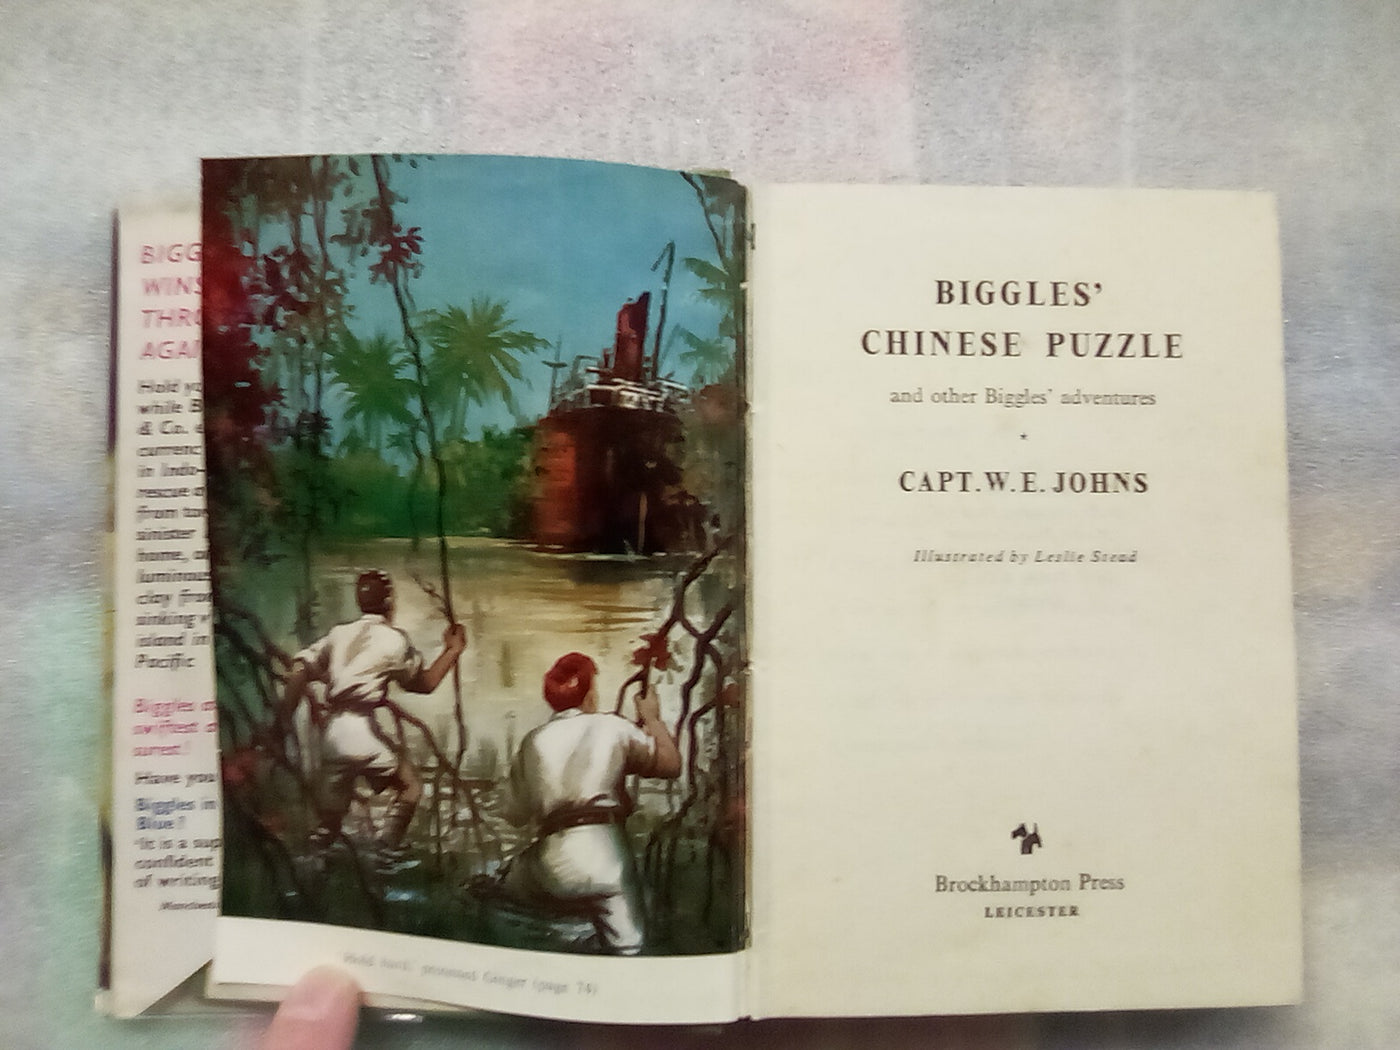 Biggles' Chinese Puzzle (1955 First Edition) by Captain W.E. Johns